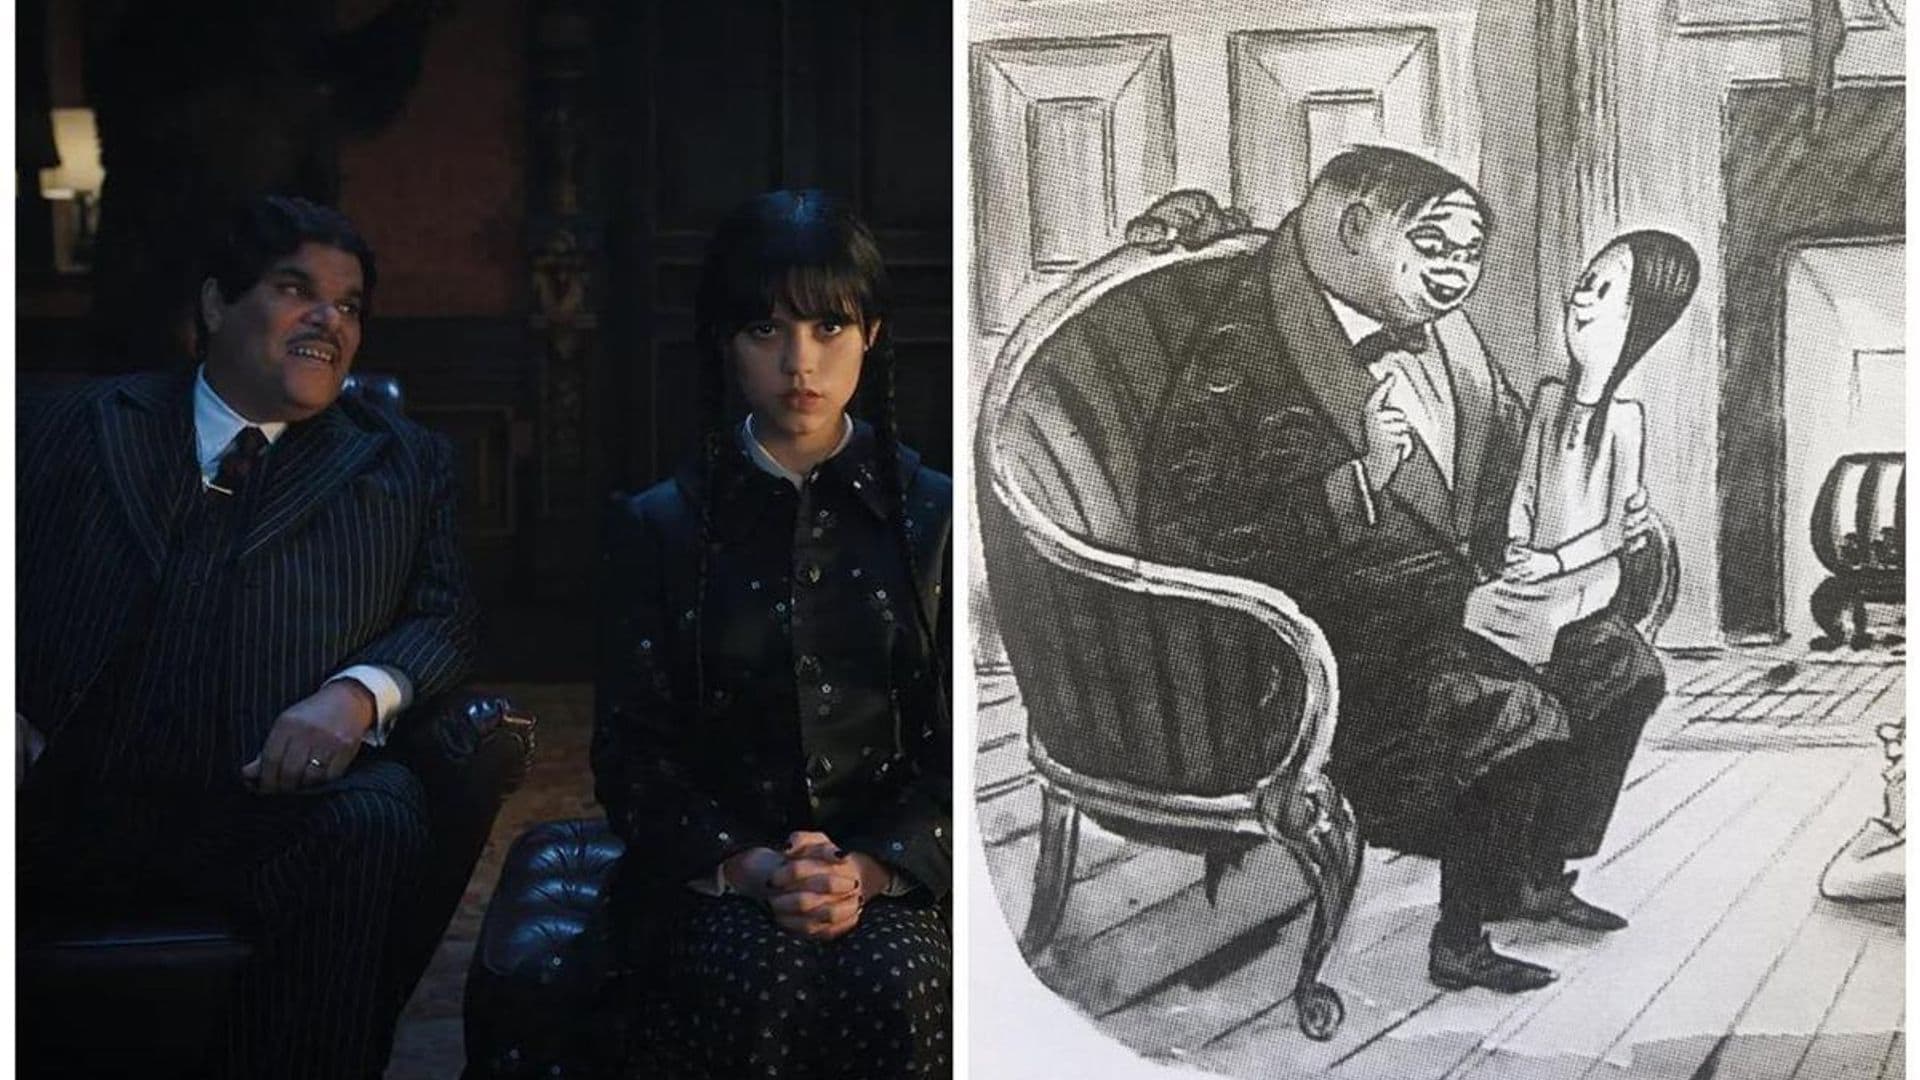 Fans of the Addams family noticed Luis Guzmán’s casting is an ode to the original Gomez in the comics